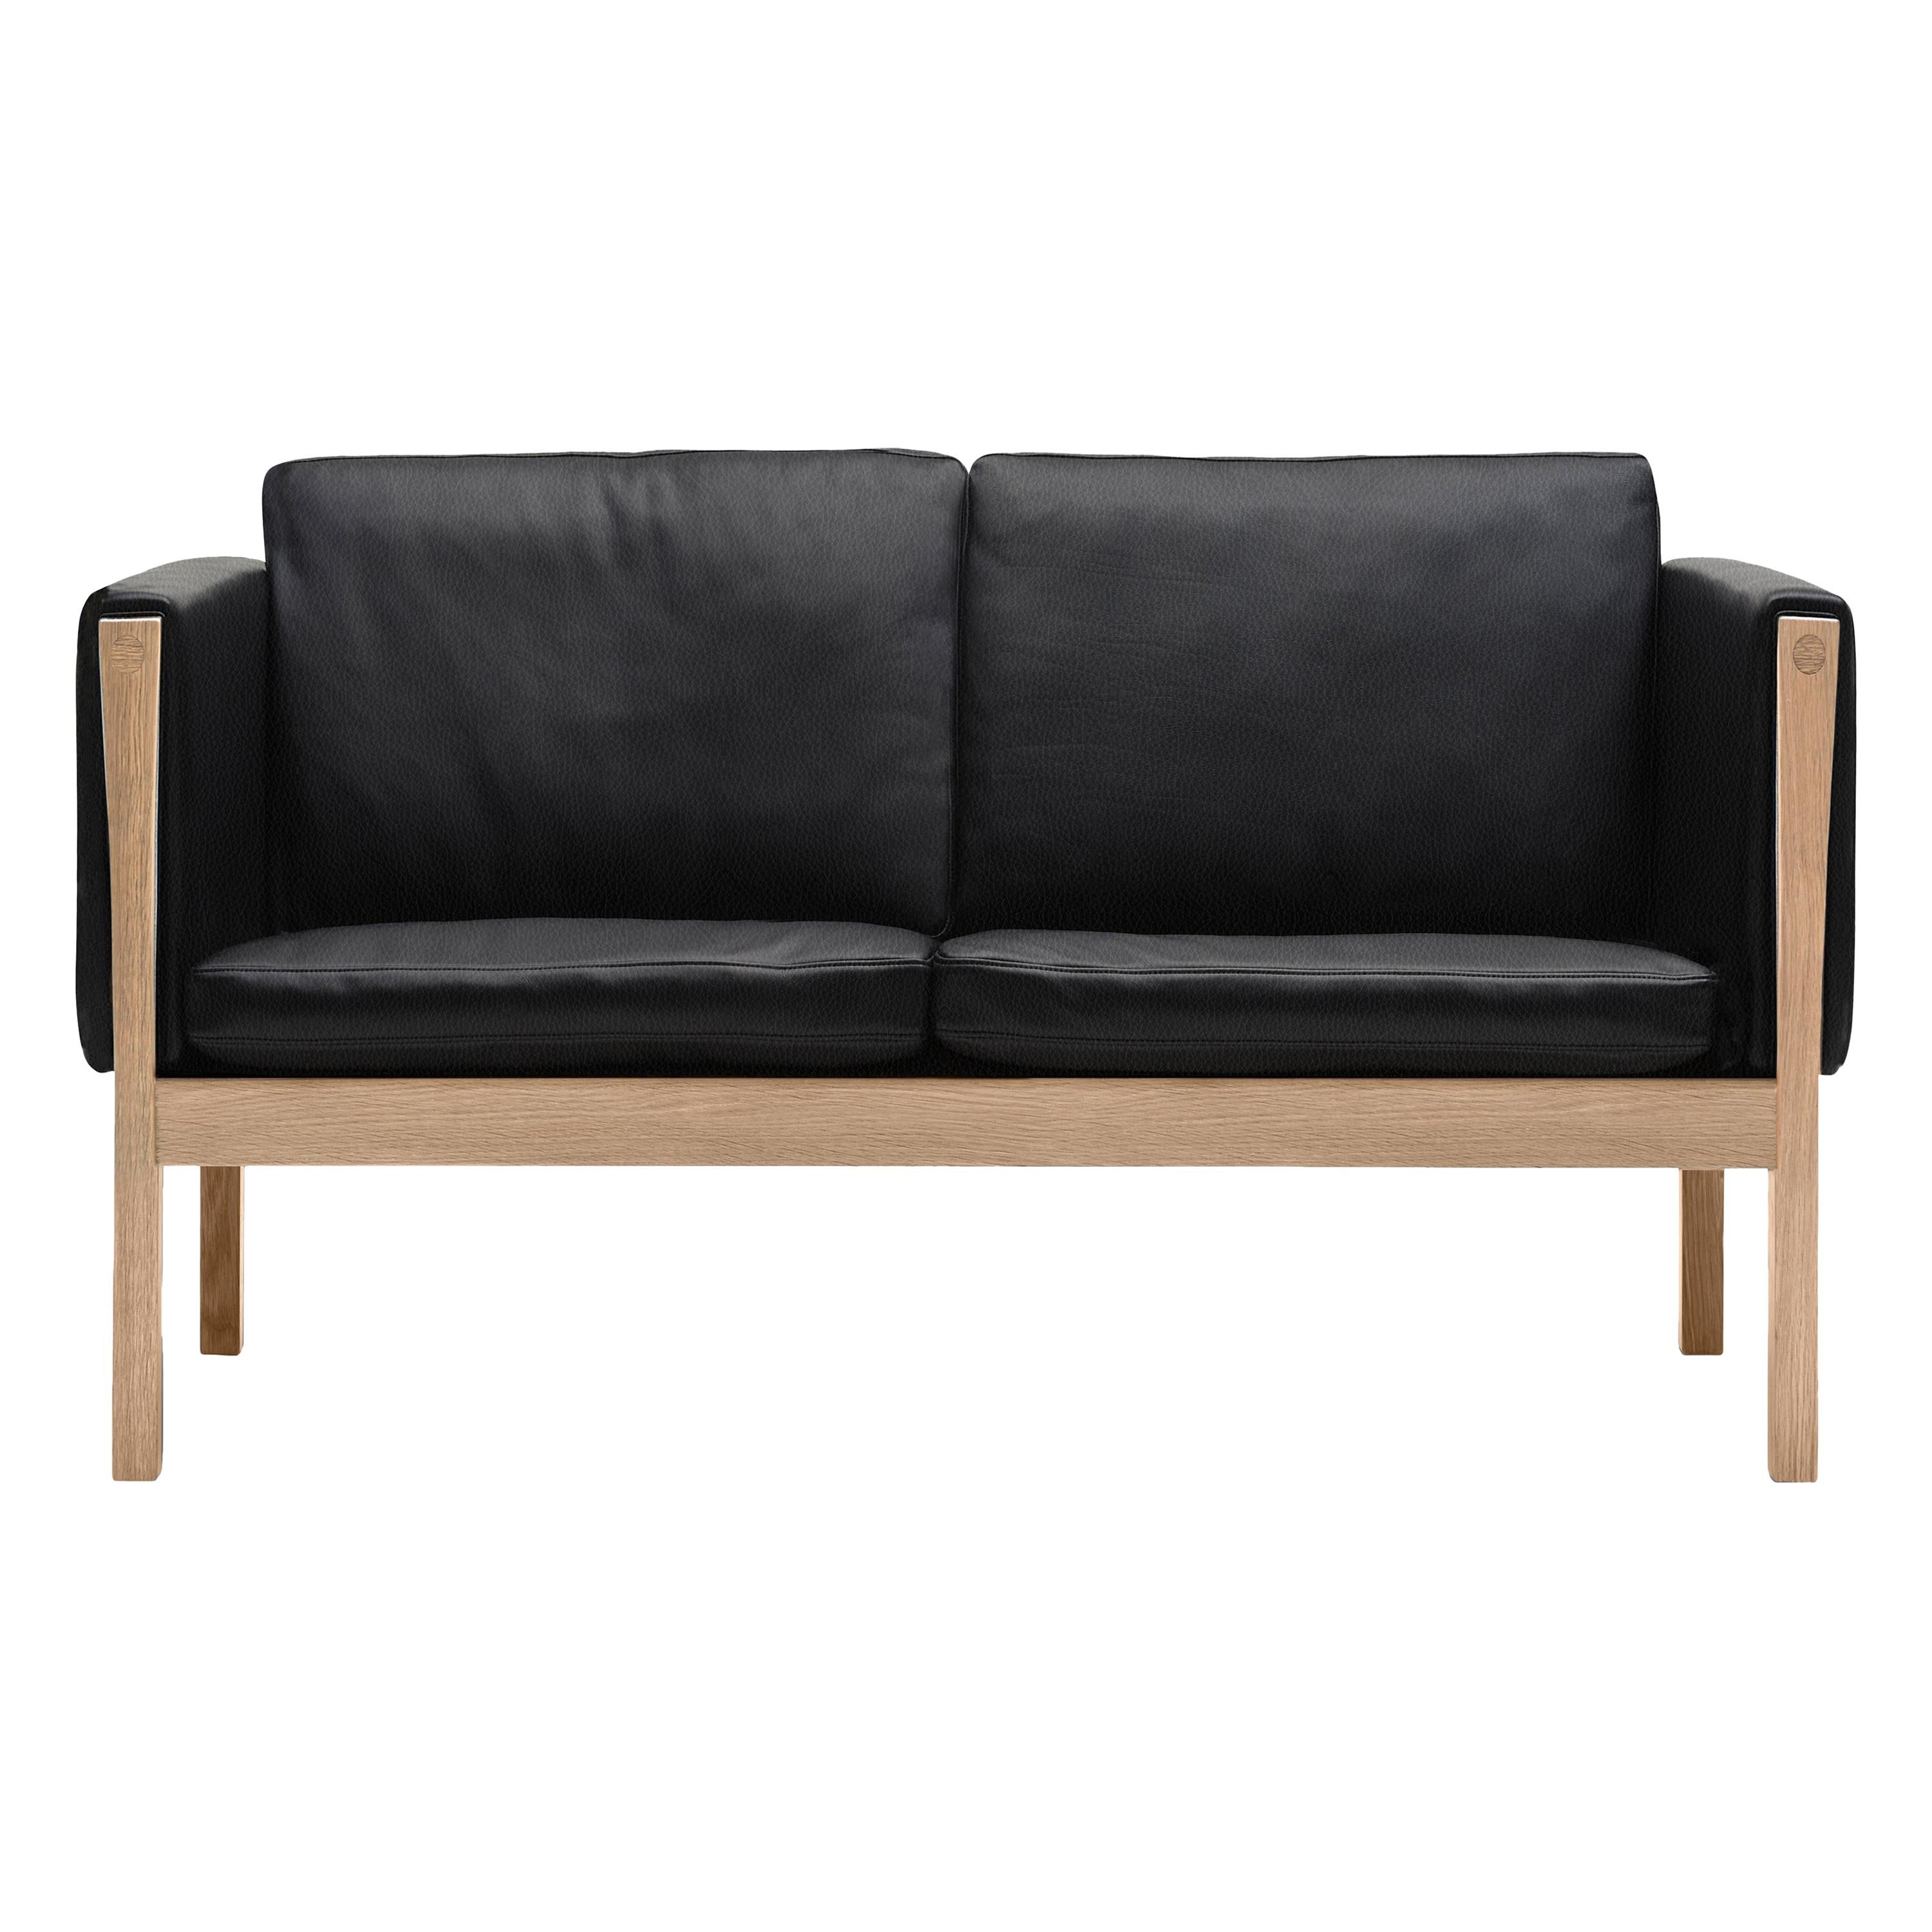 CH162 Sofa in Oiled Oak Frame with Leather Upholstery by Hans J. Wegner